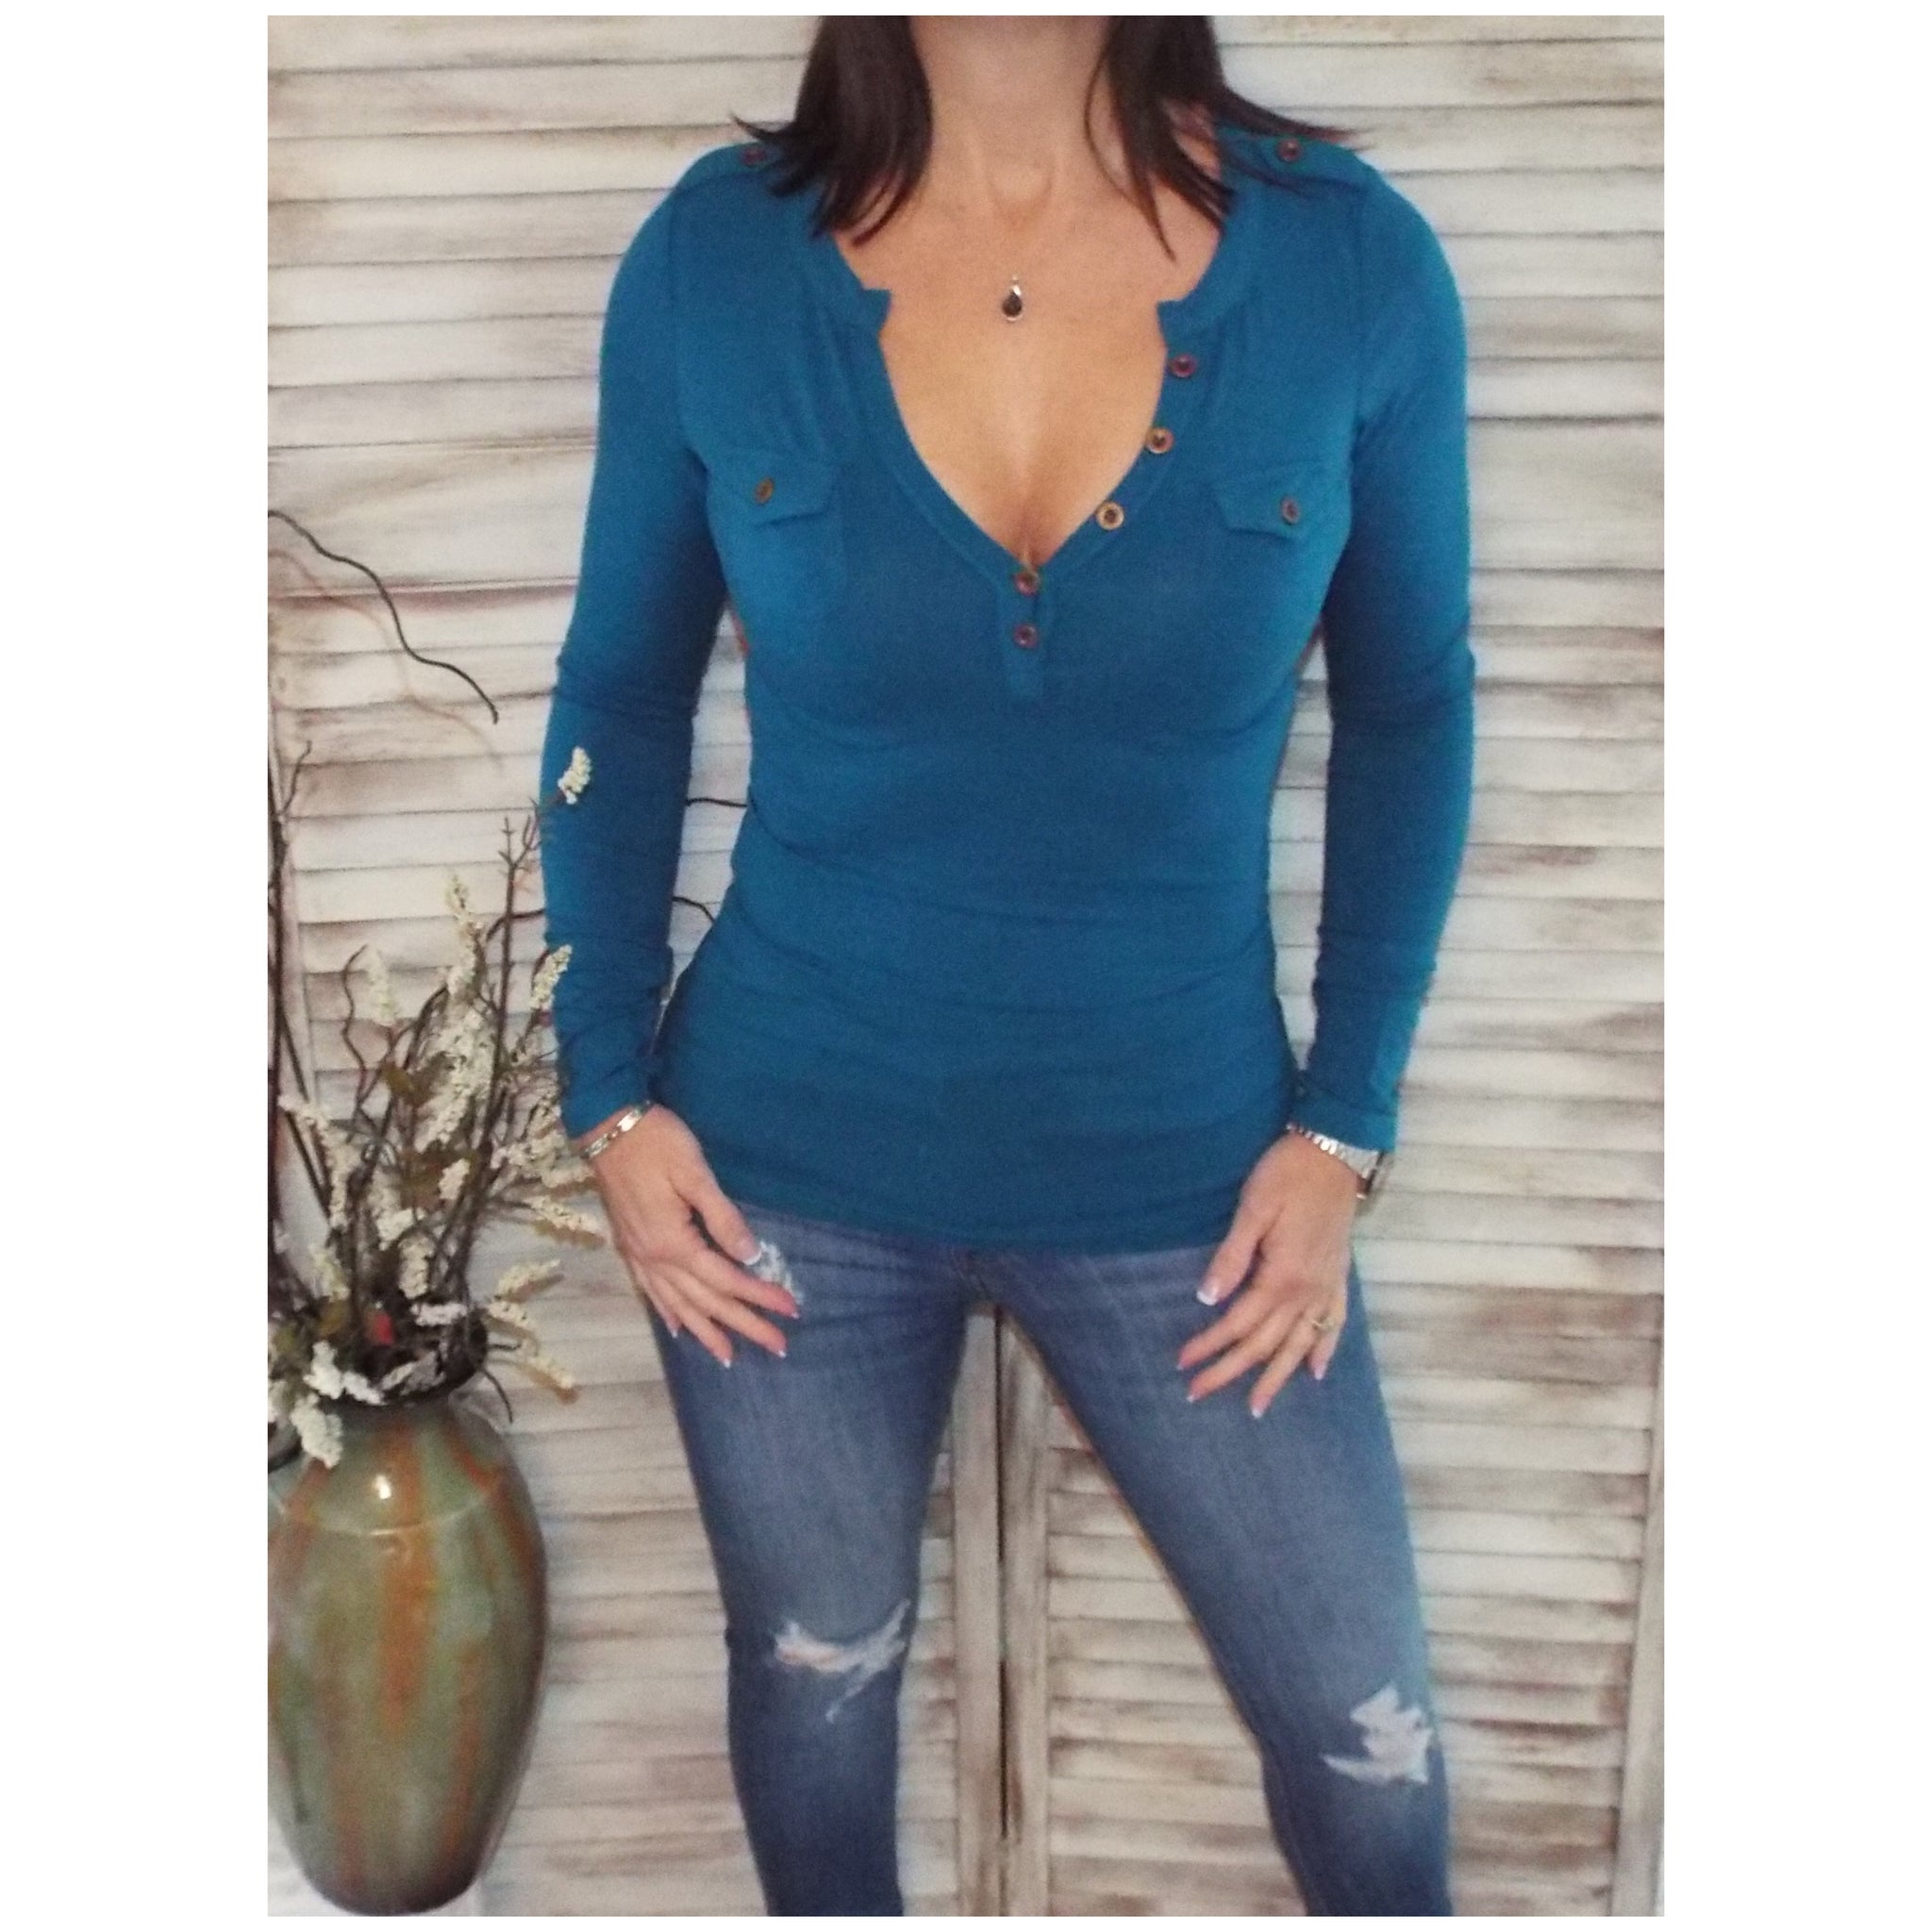 Sexy Deep V Neck Plunge Cleavage Military Henley Pocket Long Sleeve Top Teal